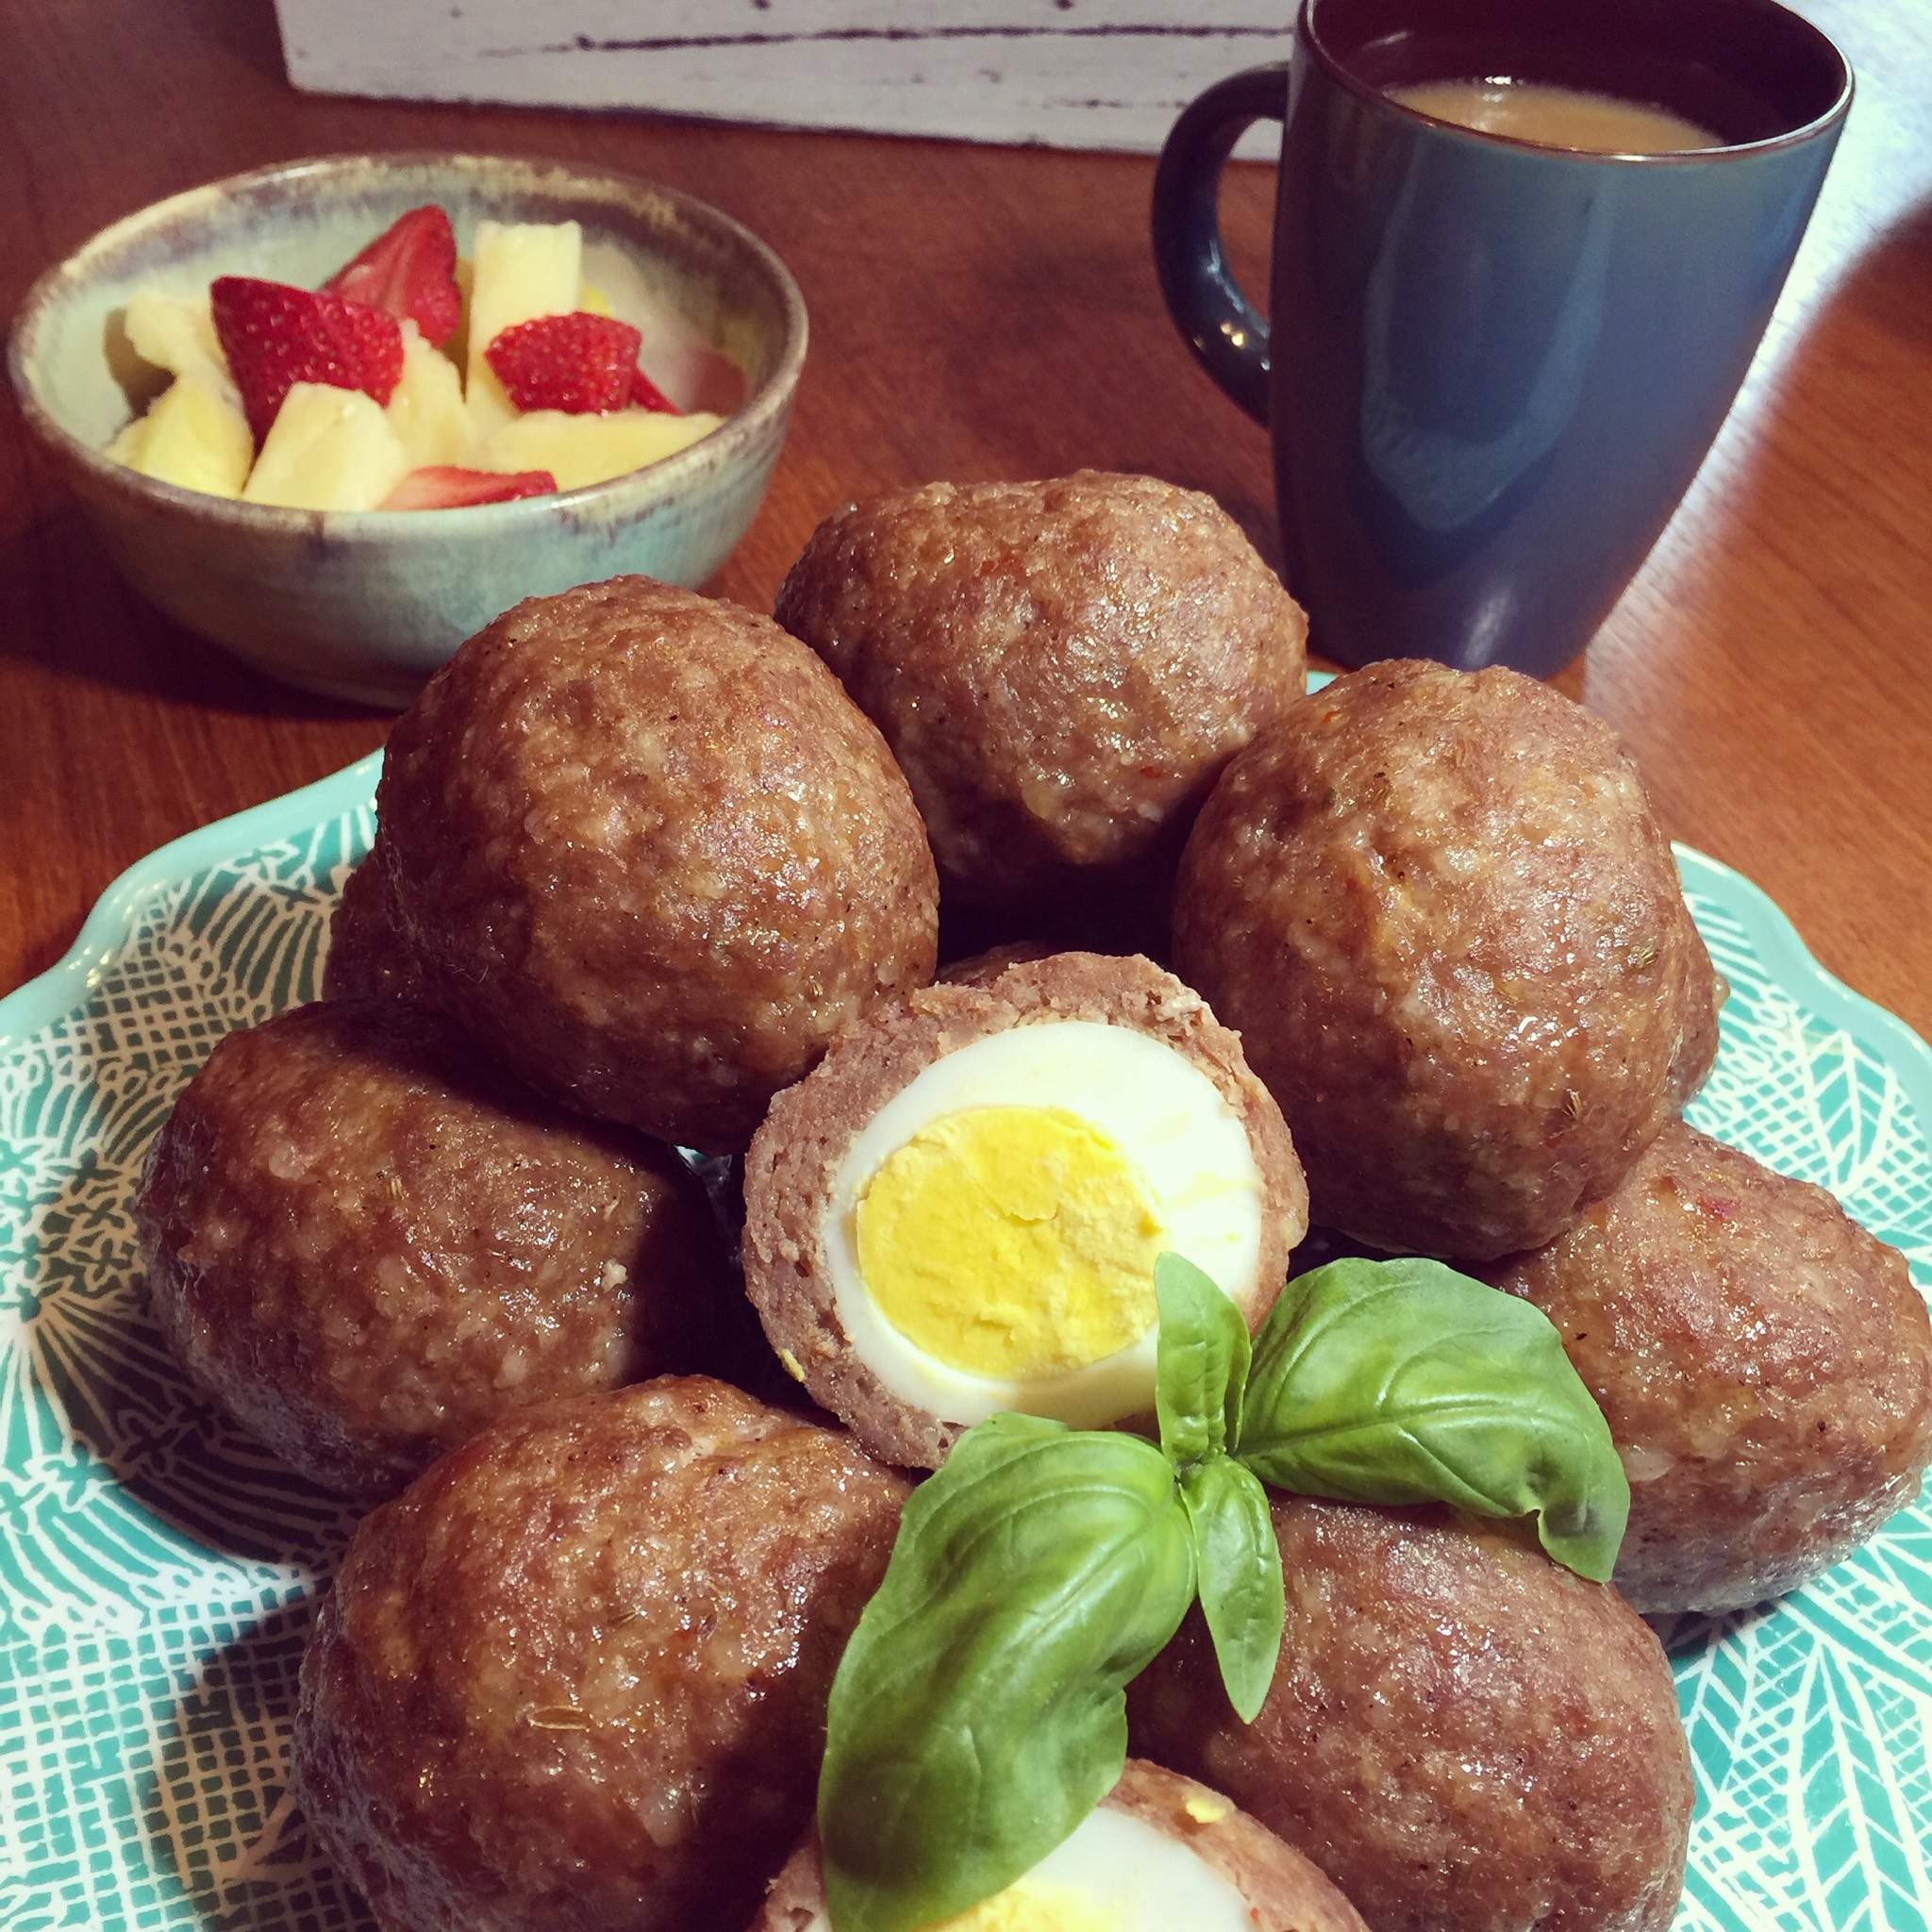 Who Knew Scotch Eggs Were A Thing?